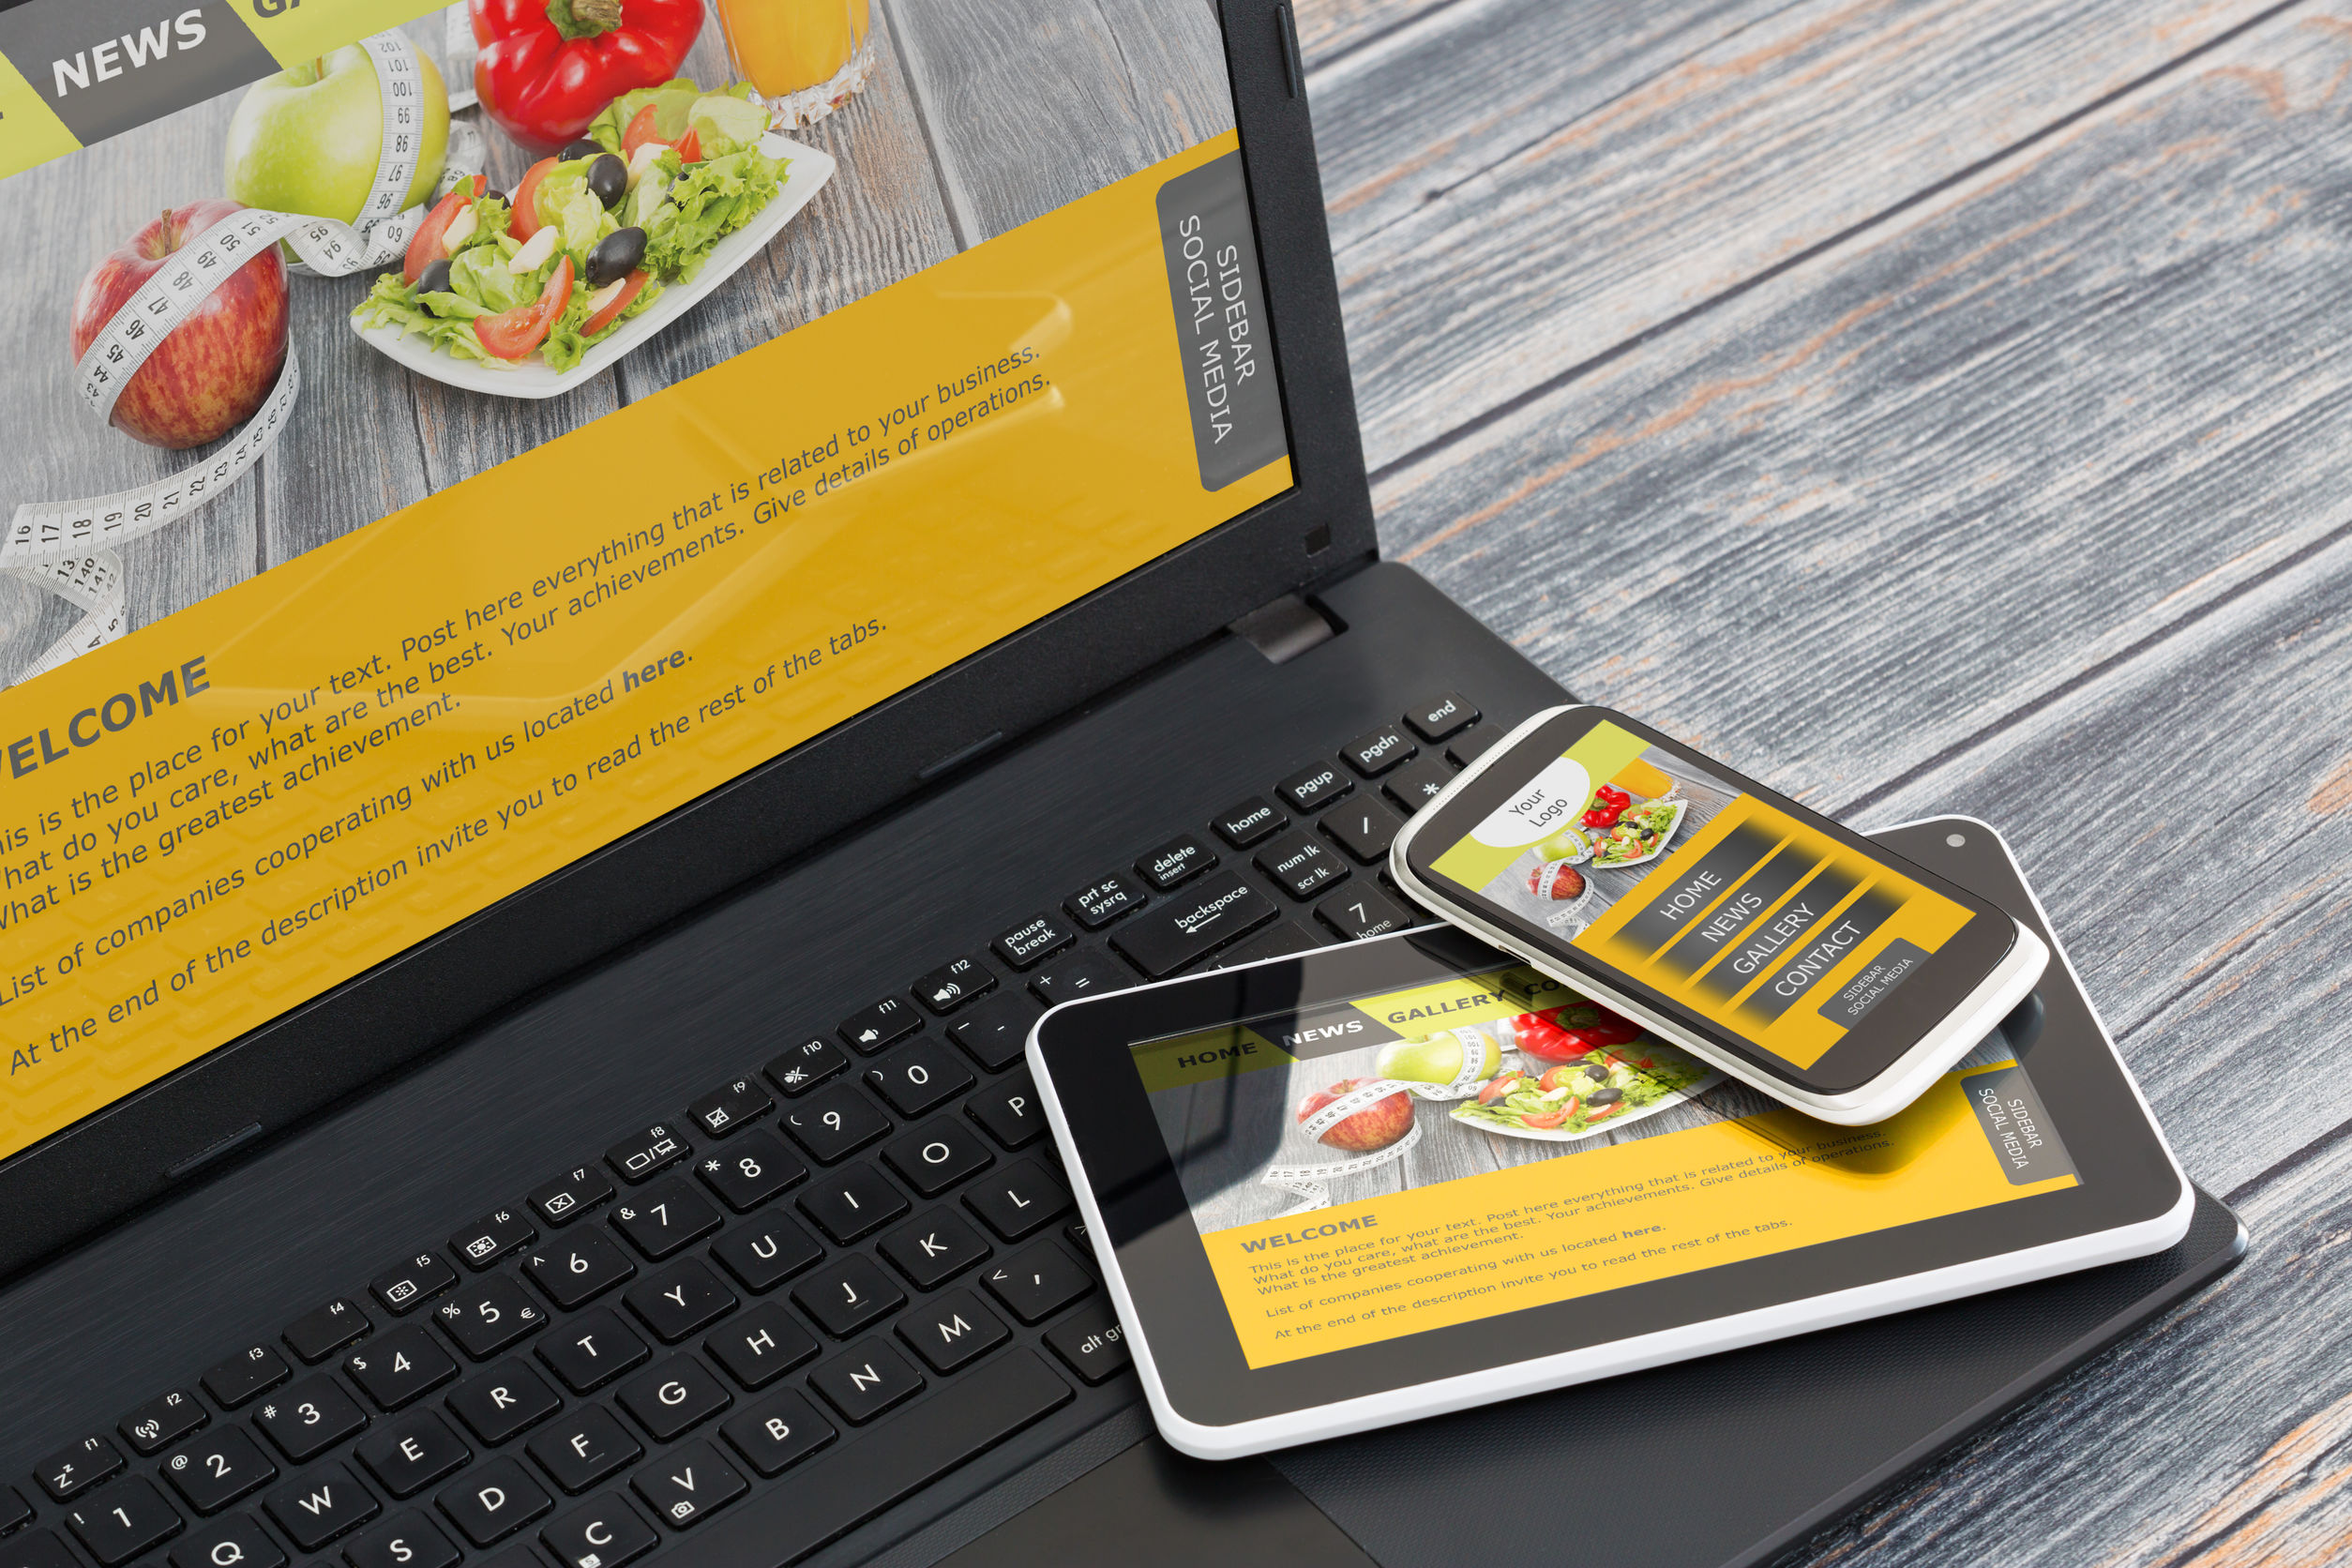 Photo of a laptop, tablet and smartphone showing the same website